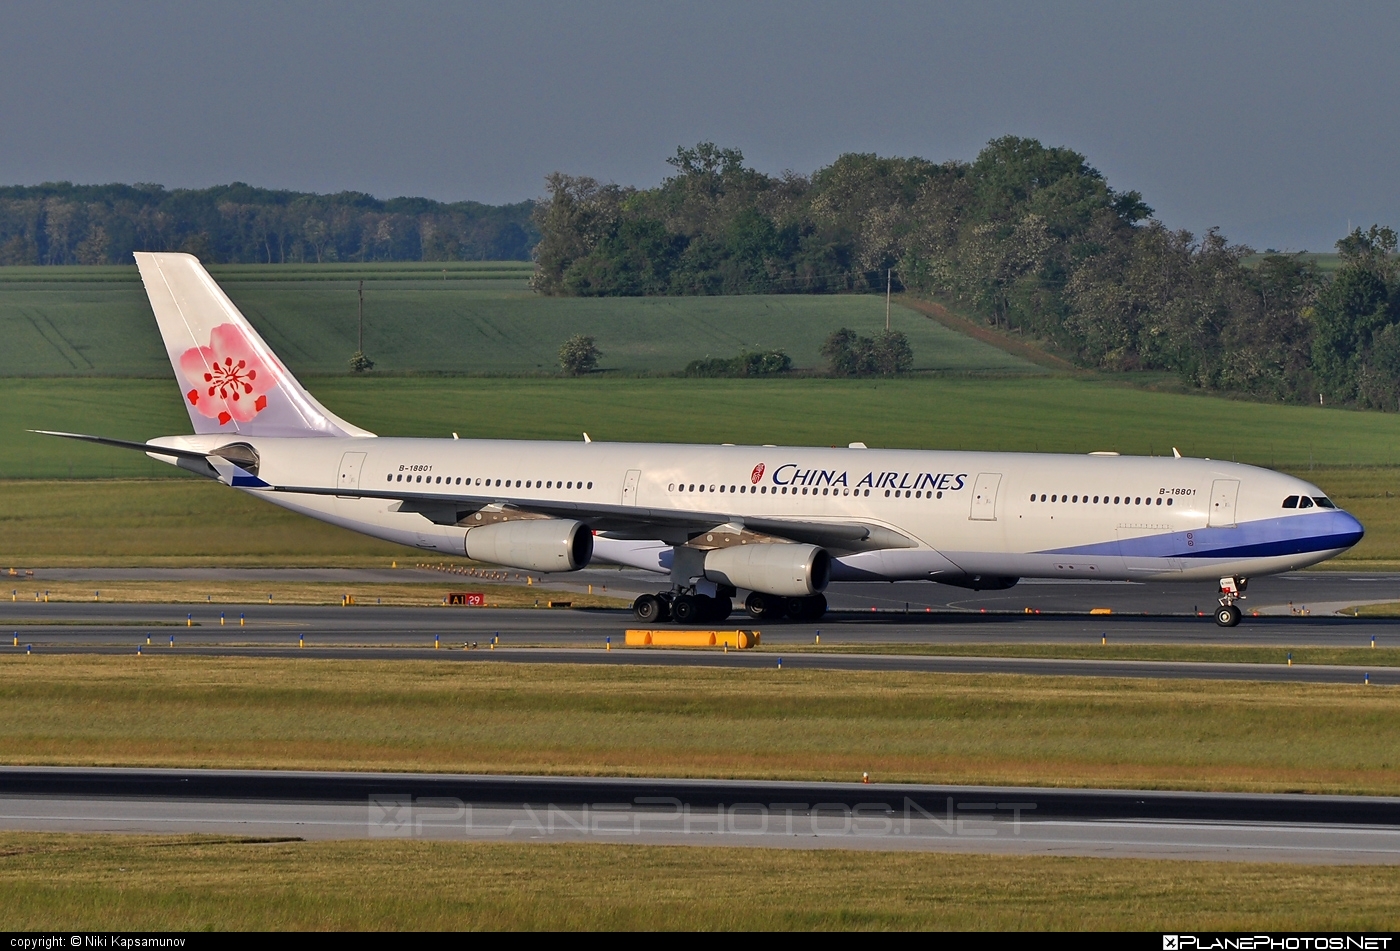 Airbus A340-313E - B-18801 operated by China Airlines #a340 #a340family #airbus #airbus340 #chinaairlines